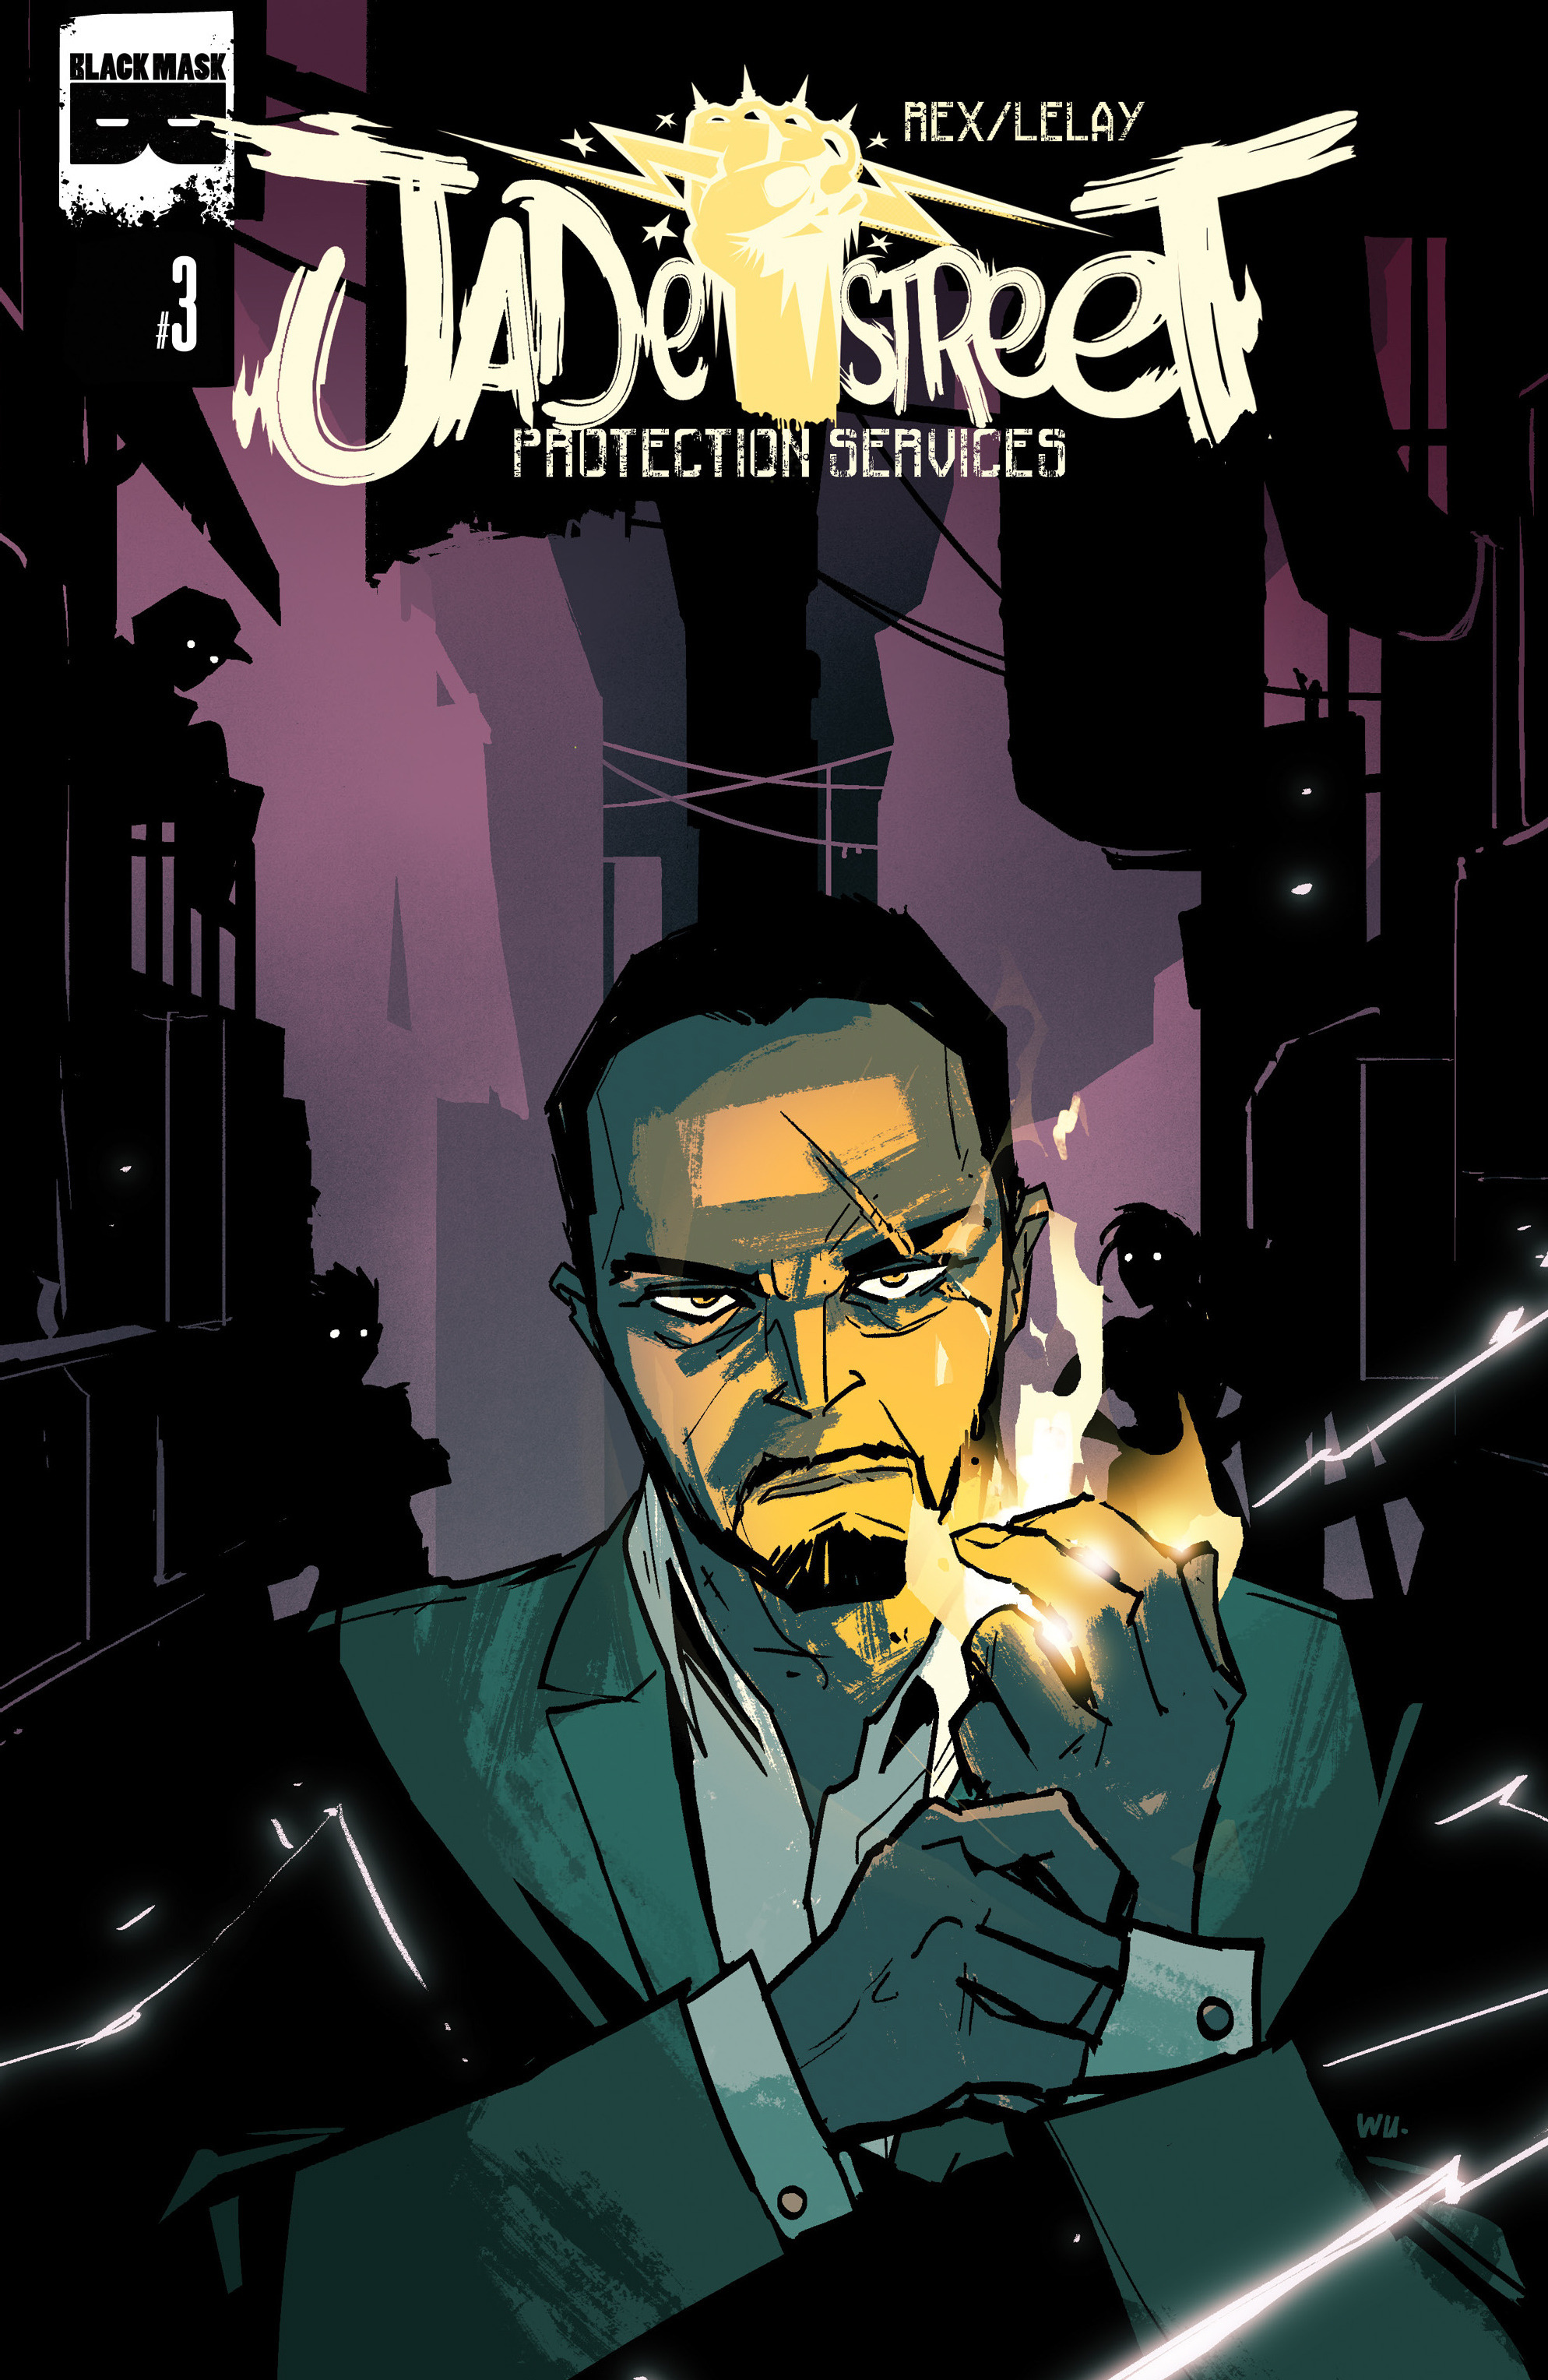 Read online Jade Street Protection Services comic -  Issue #3 - 1